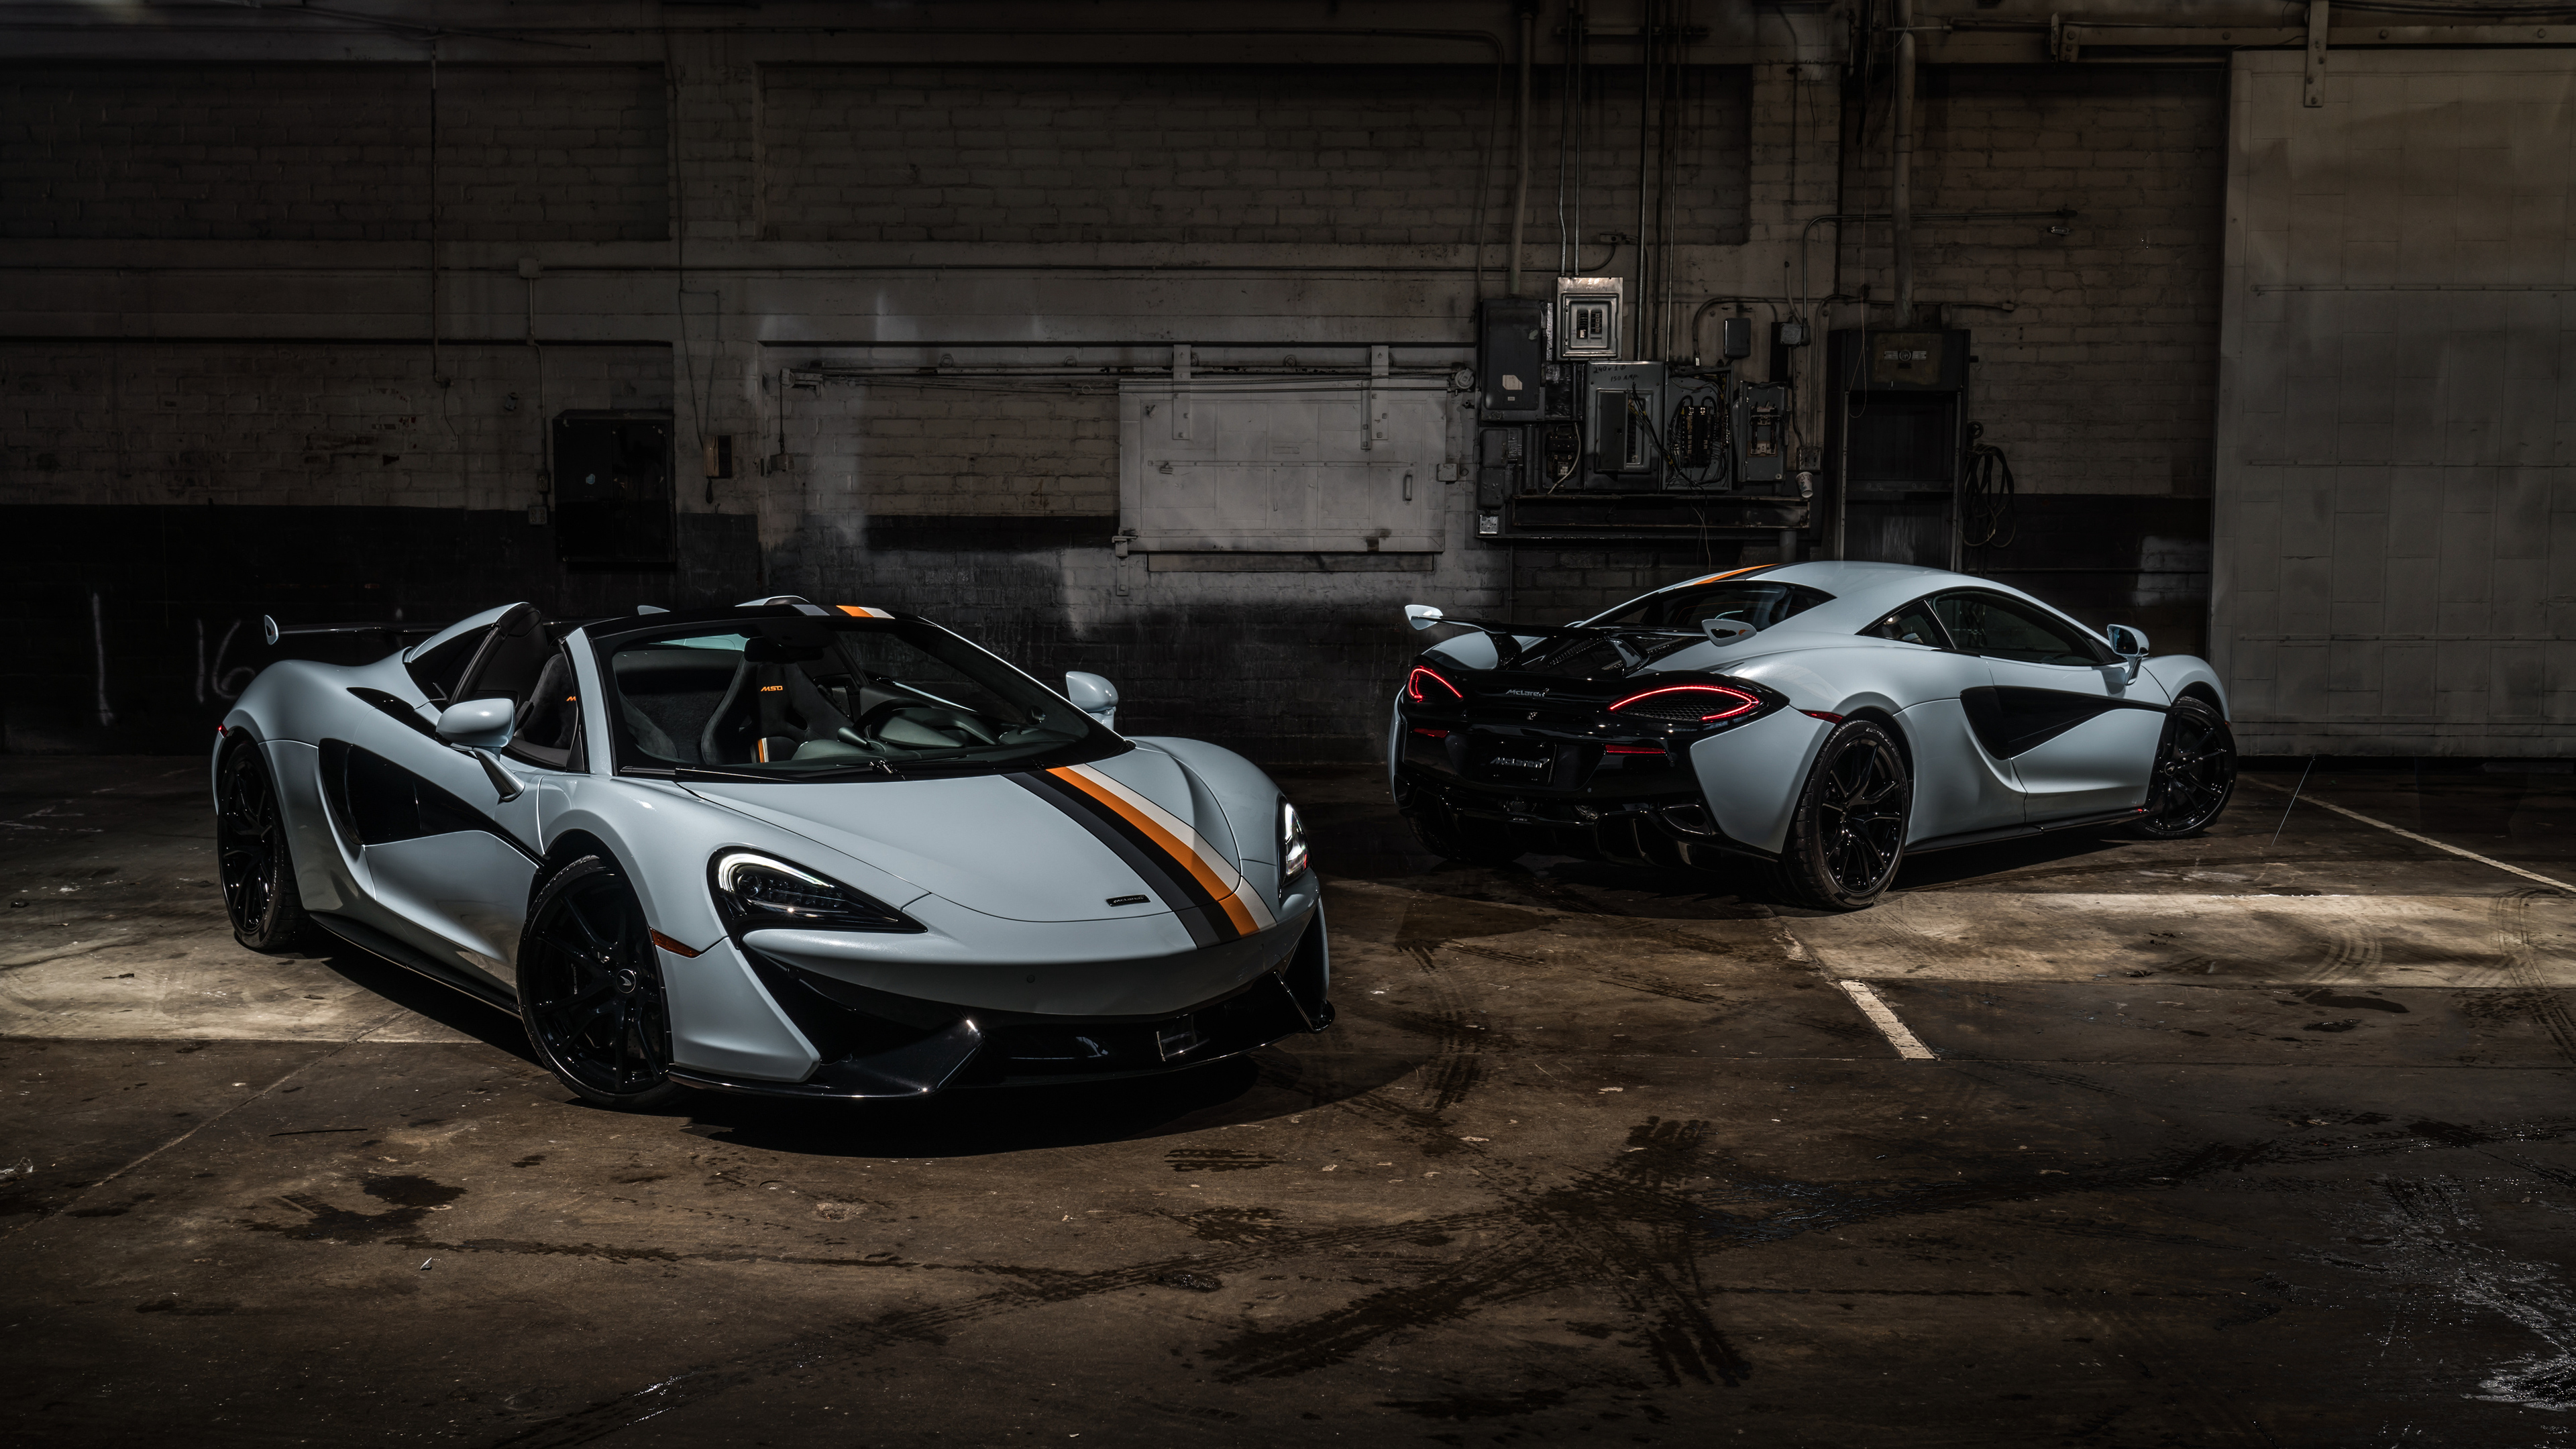 mclaren mso 570s spider and coupe muriwai 4k 1546362275 - McLaren MSO 570S Spider and Coupe Muriwai 4k - mclaren wallpapers, mclaren 570s spider wallpapers, hd-wallpapers, cars wallpapers, 4k-wallpapers, 2018 cars wallpapers